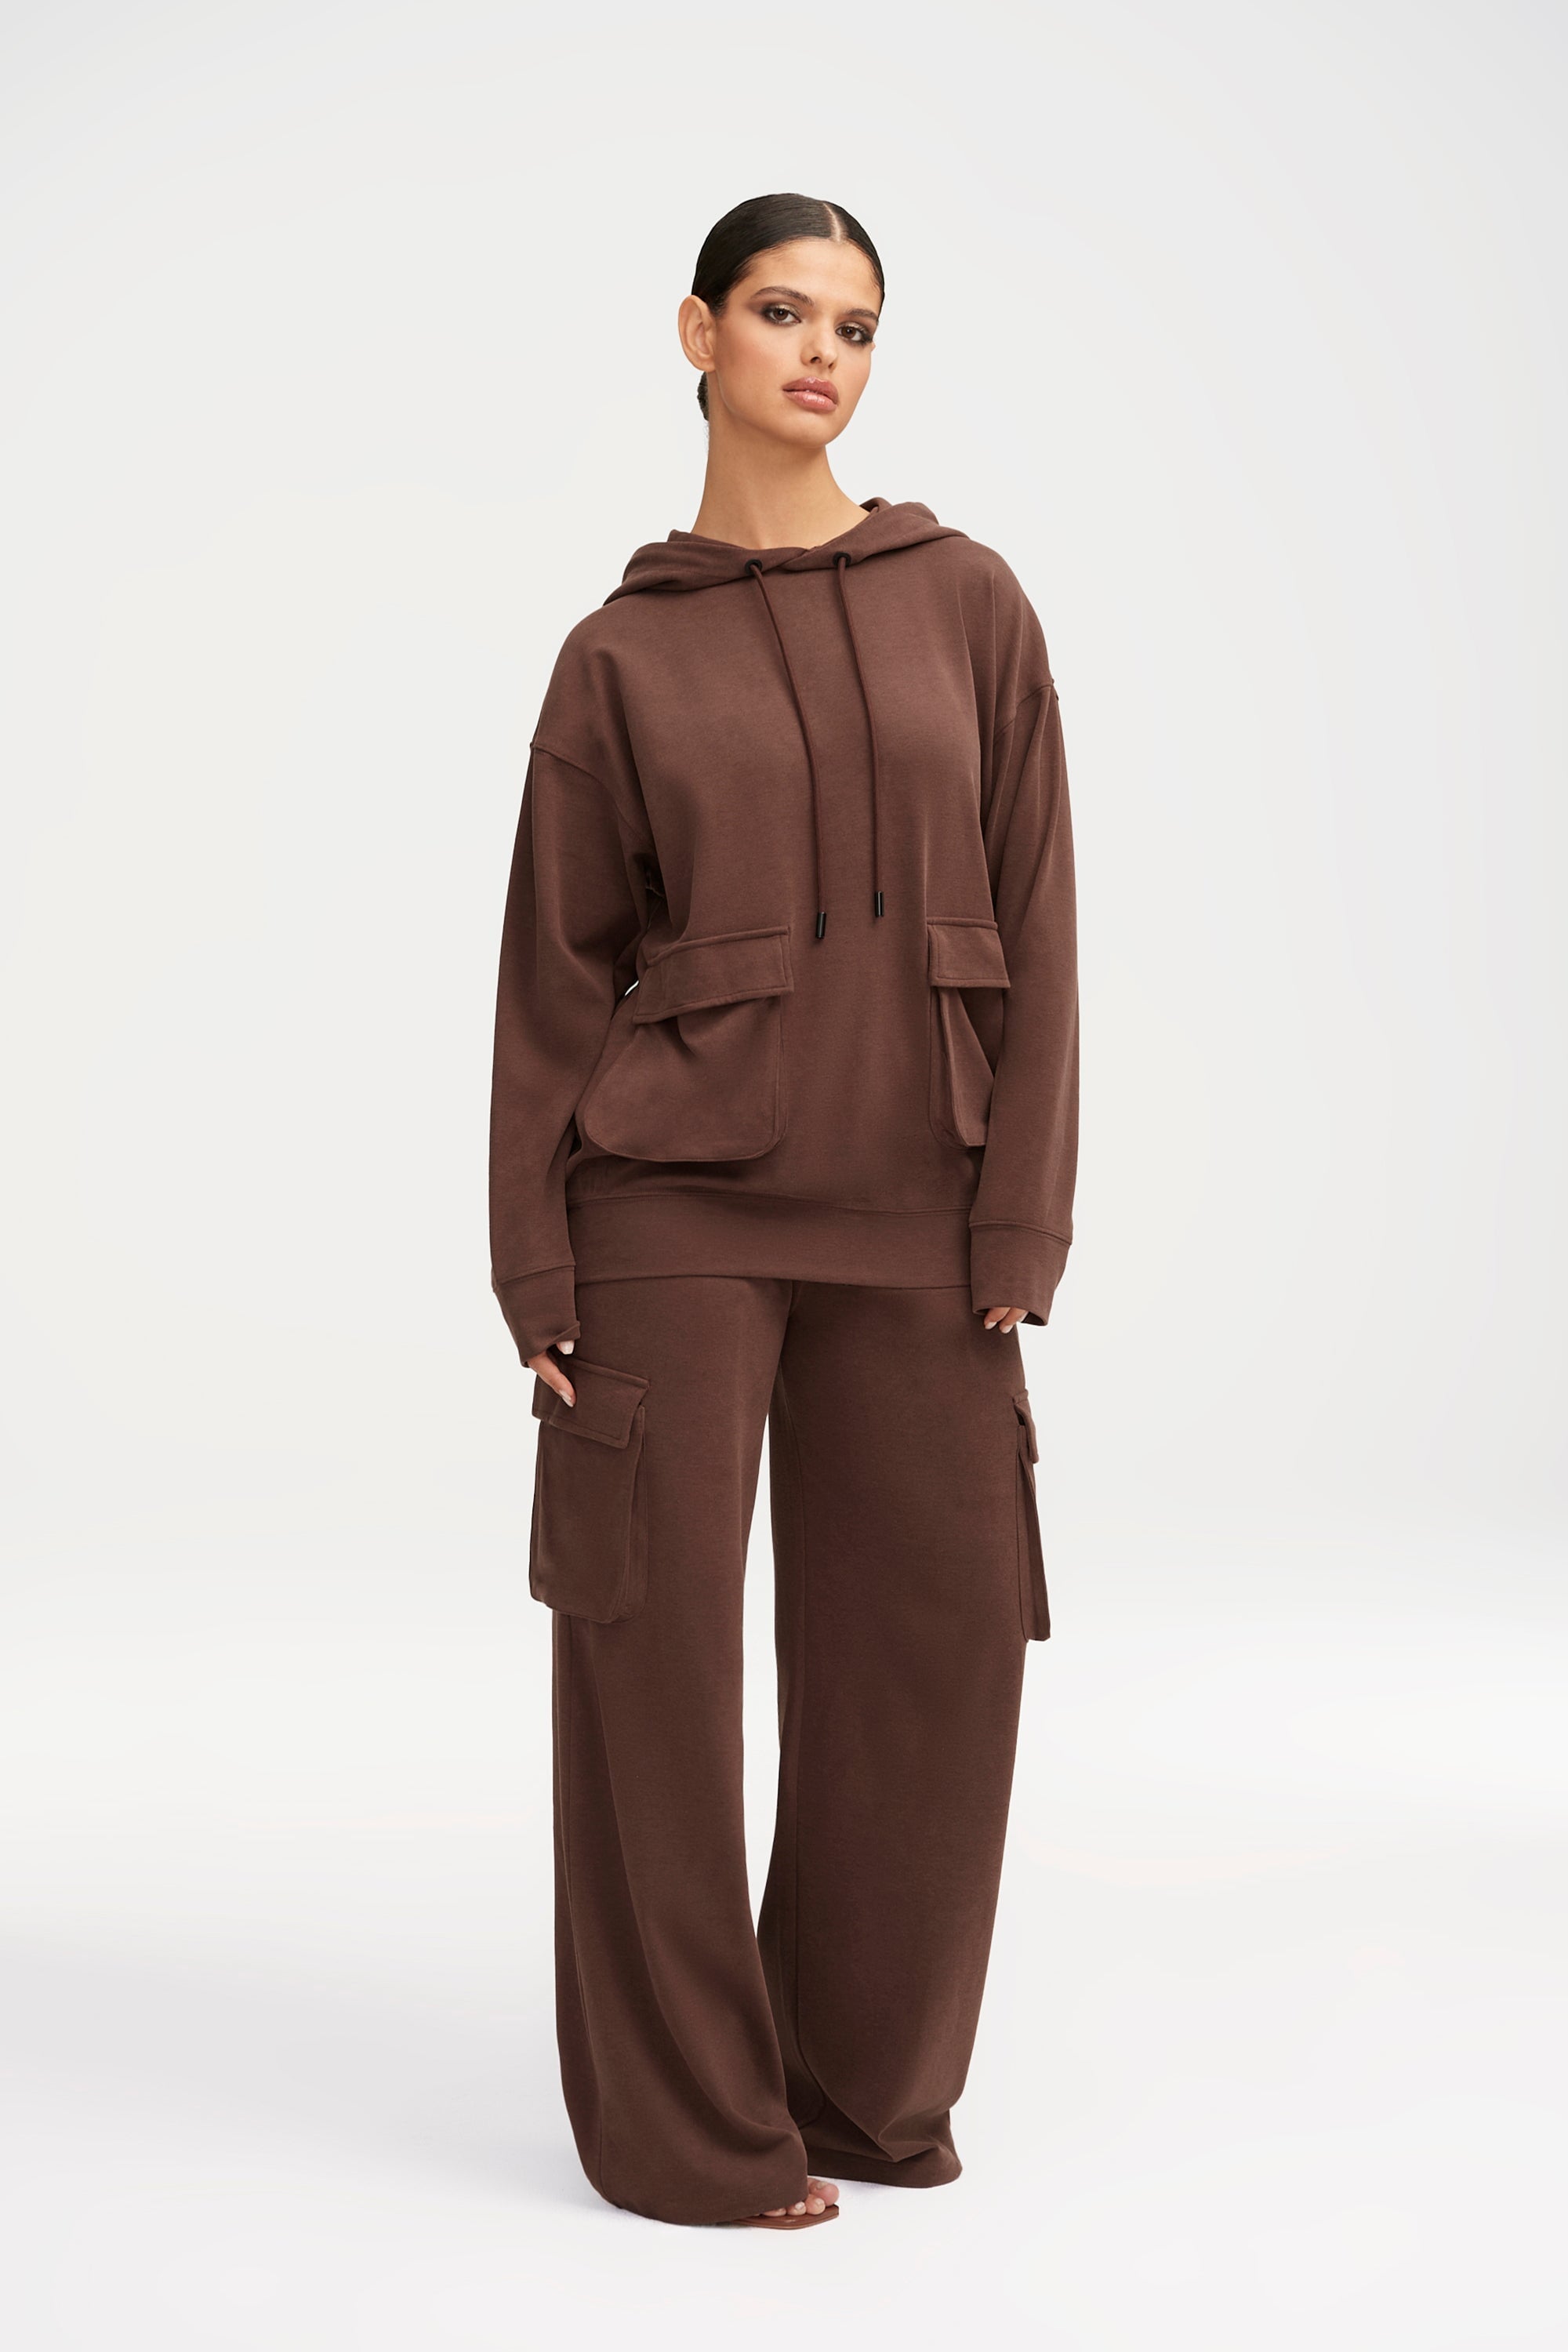 Demi Oversized Cargo Pocket Hoodie - Brown Clothing Veiled 